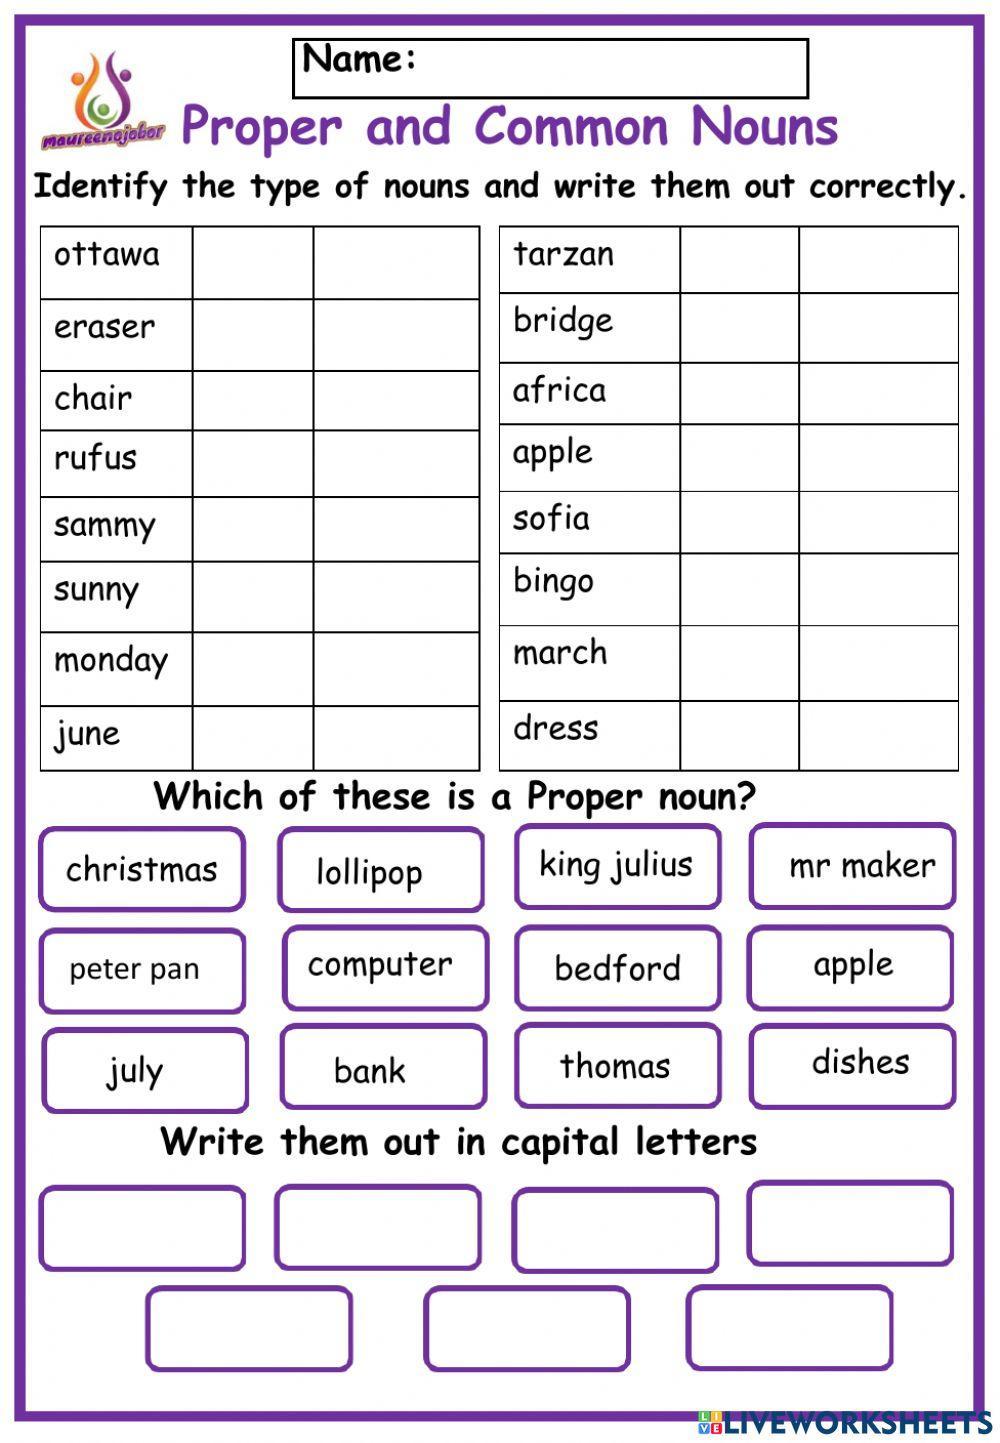 Proper And Common Nouns Online Activity For Grade 2 Live Worksheets